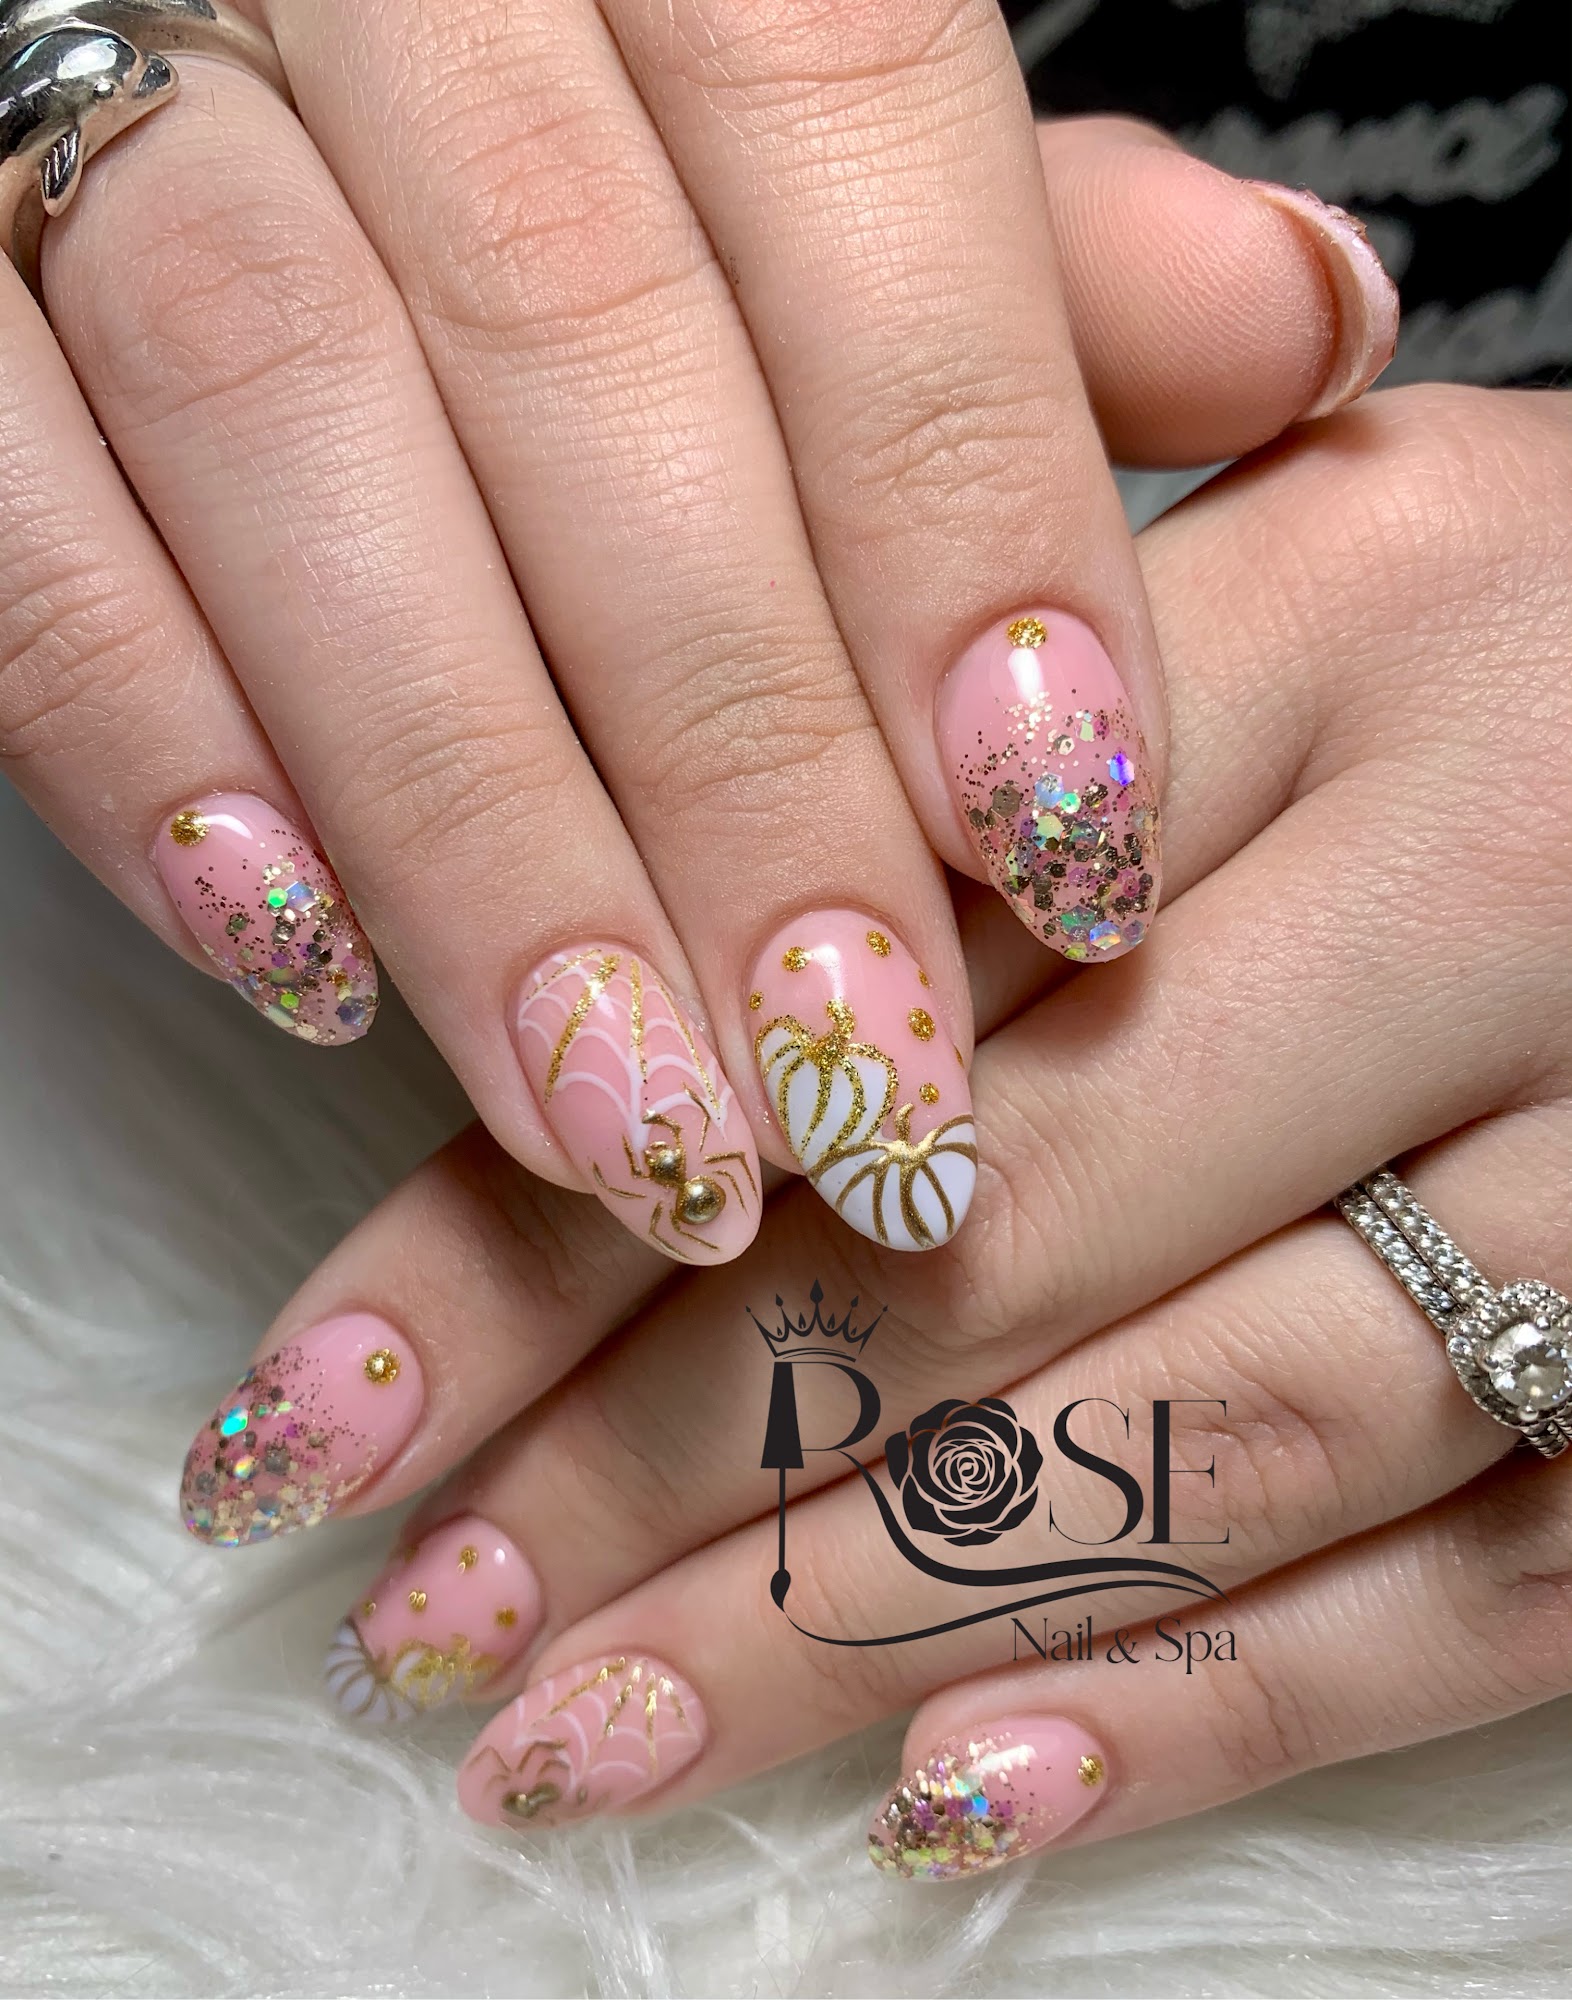 Rose Nails & Spa 120 Henry Dr # 2, Portage Wisconsin 53901